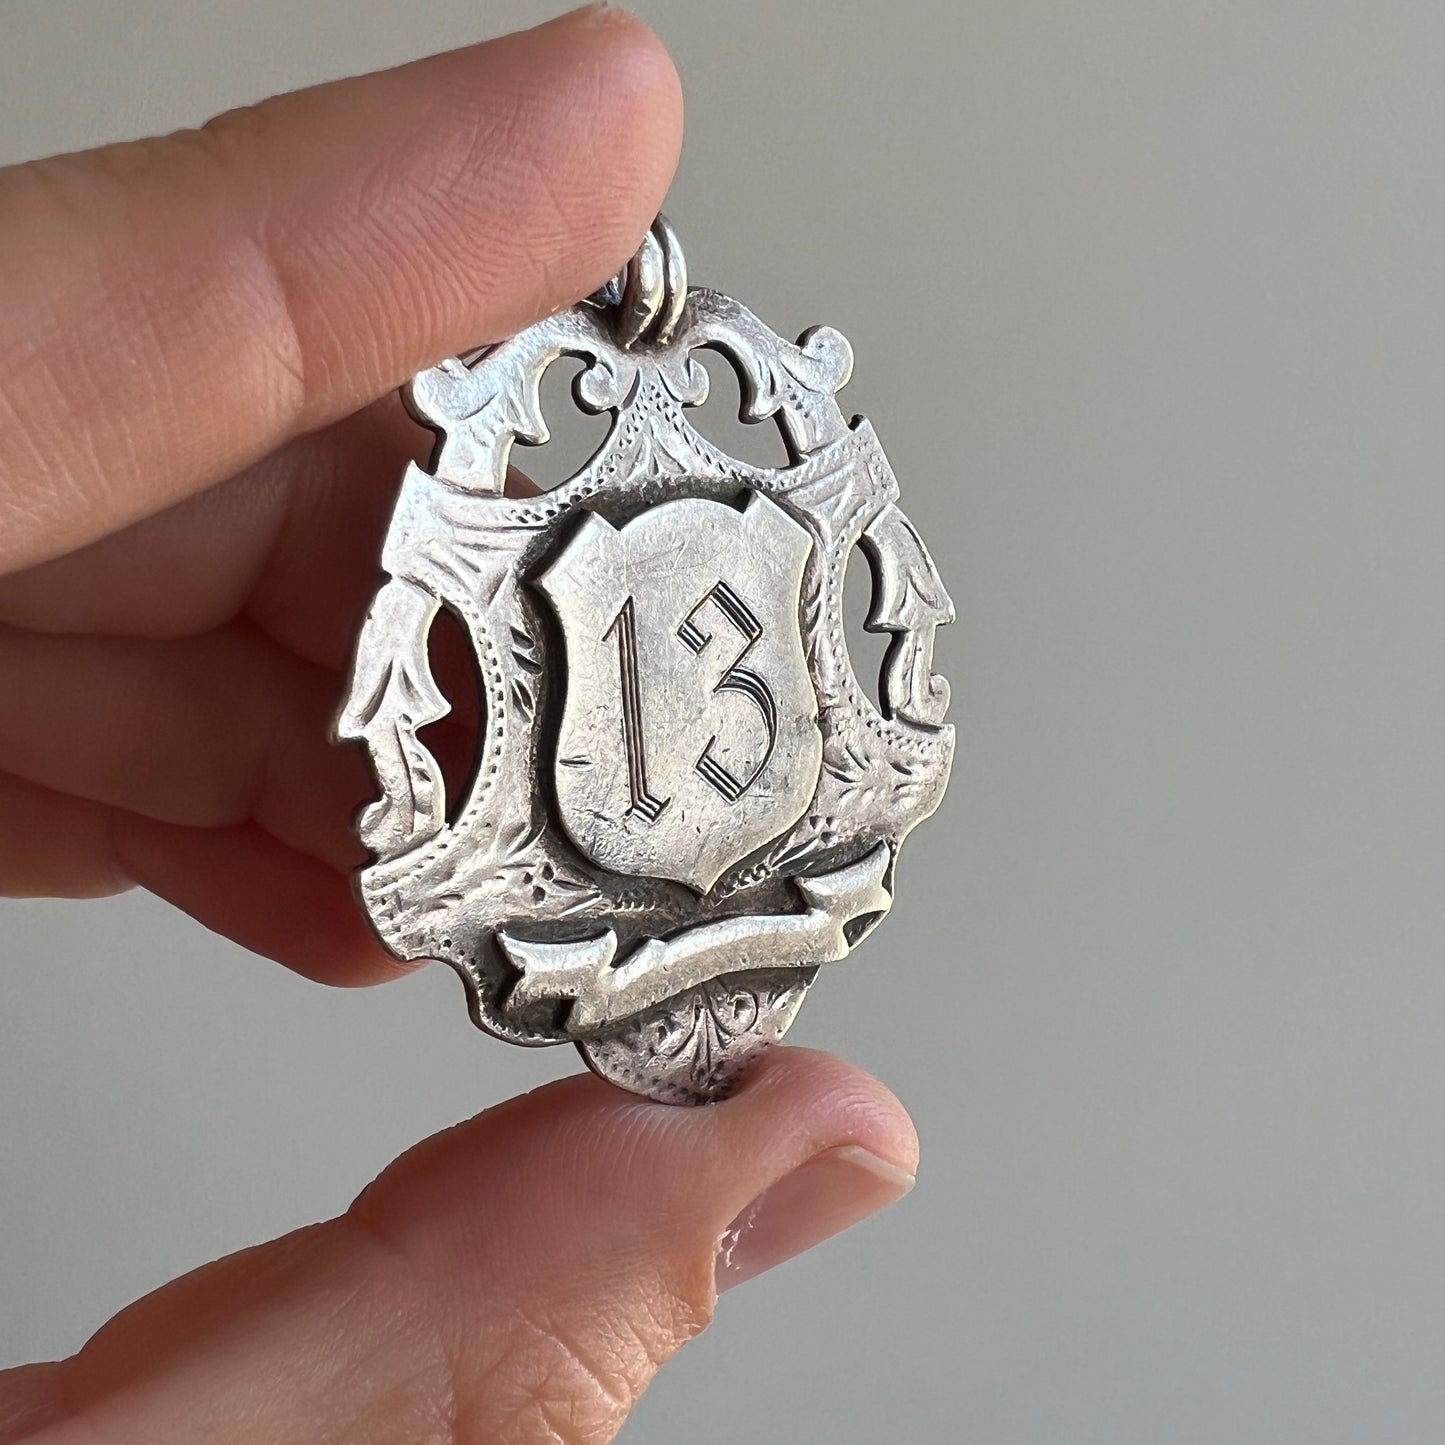 reimagined A N T I Q U E // lucky shield / sterling silver antique fob medal with new '13' engraving / a pendant